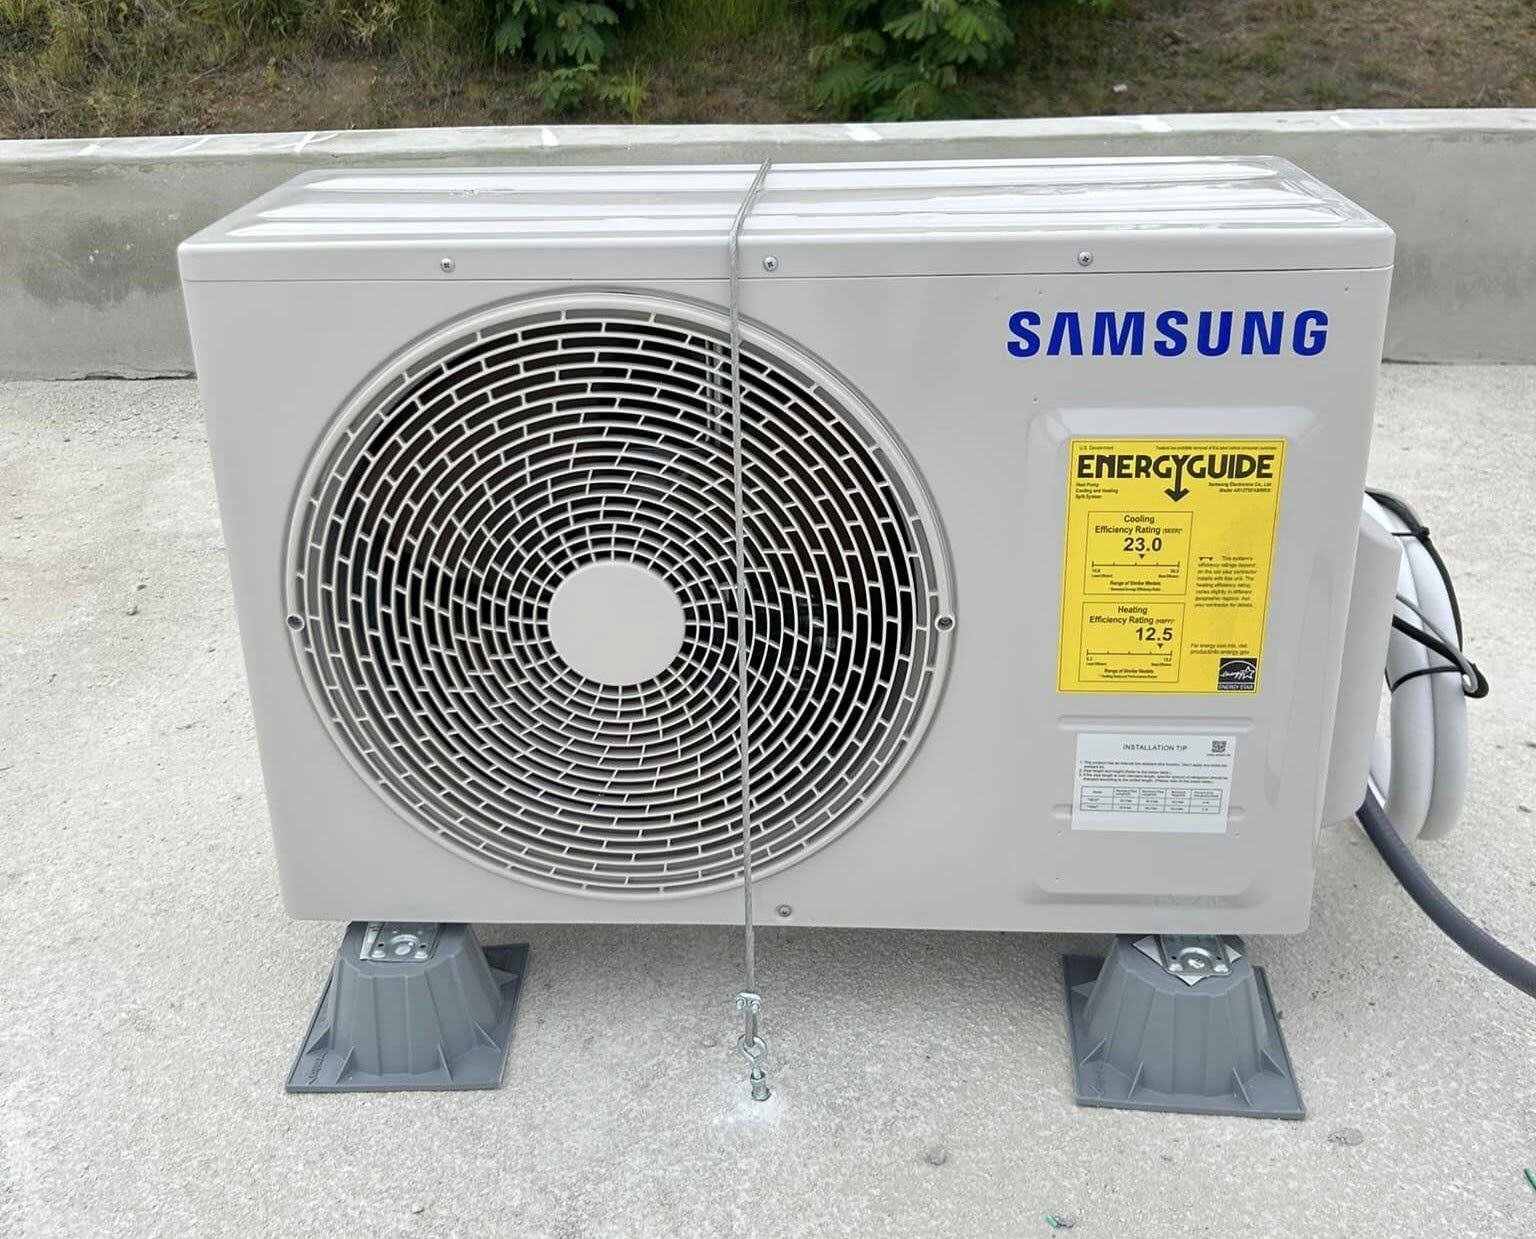 How To Fix The Error Code E235 For Samsung Air Conditioner